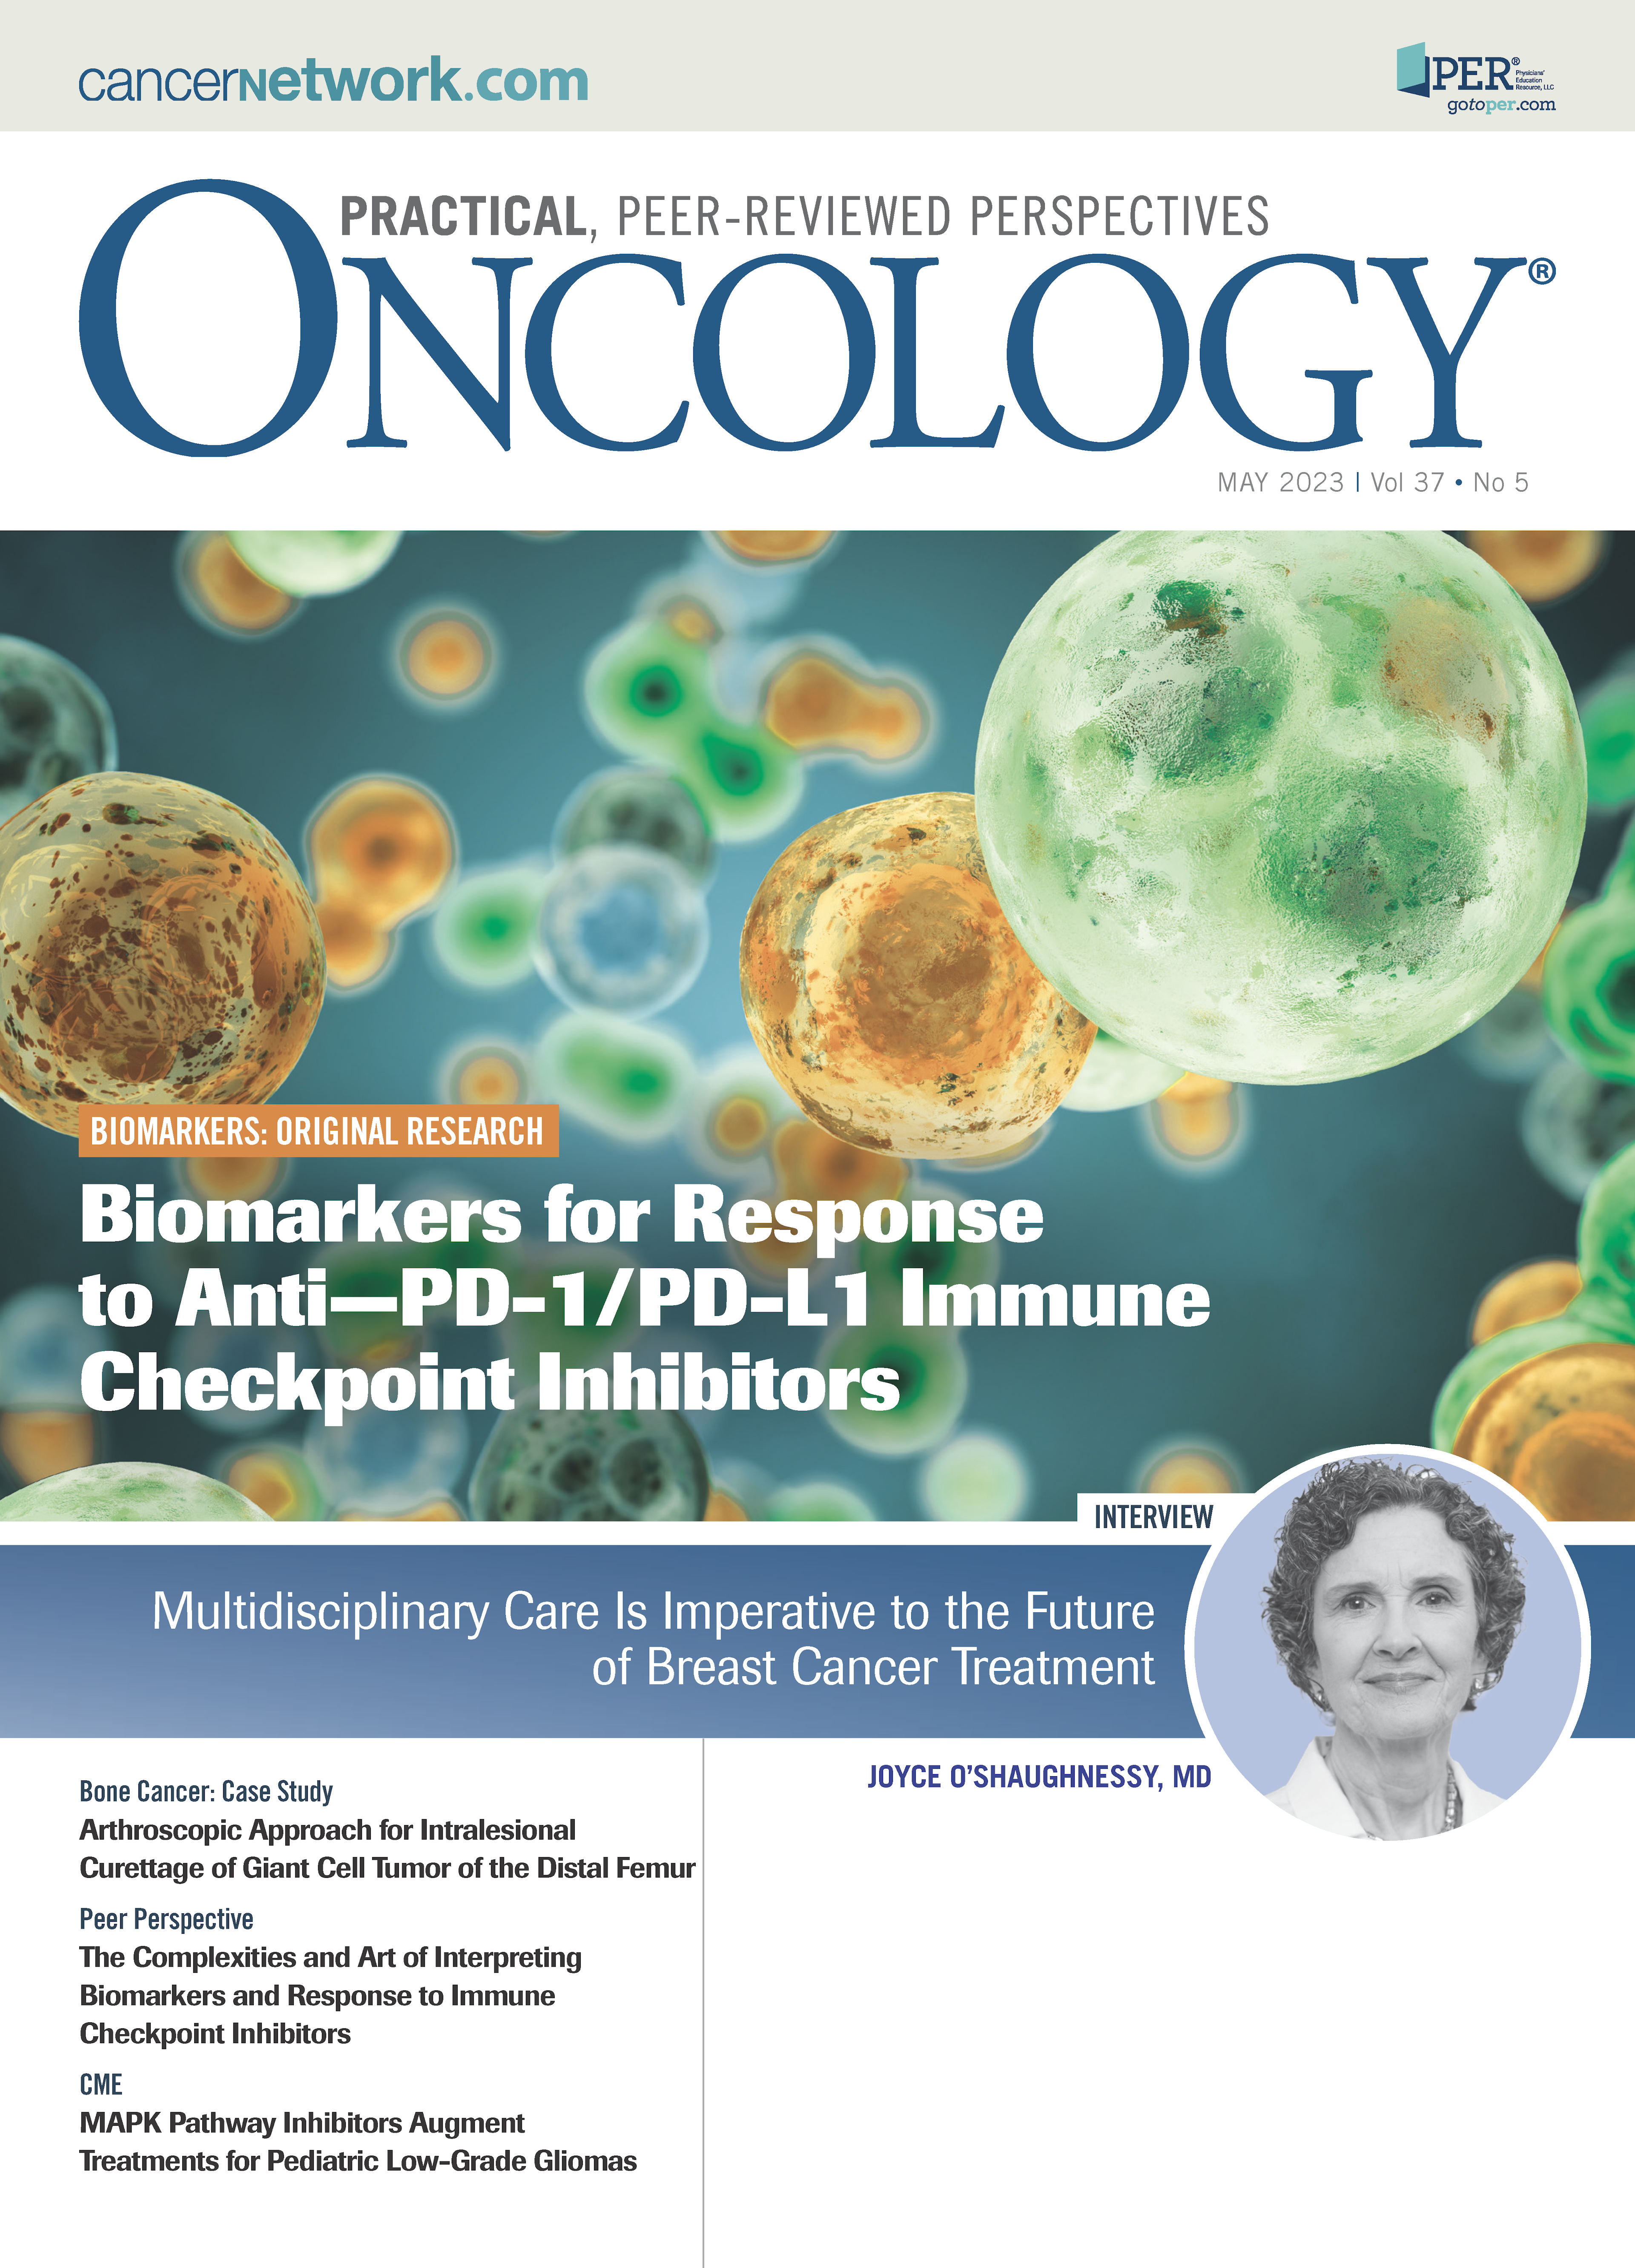 ONCOLOGY Vol 37, Issue 5